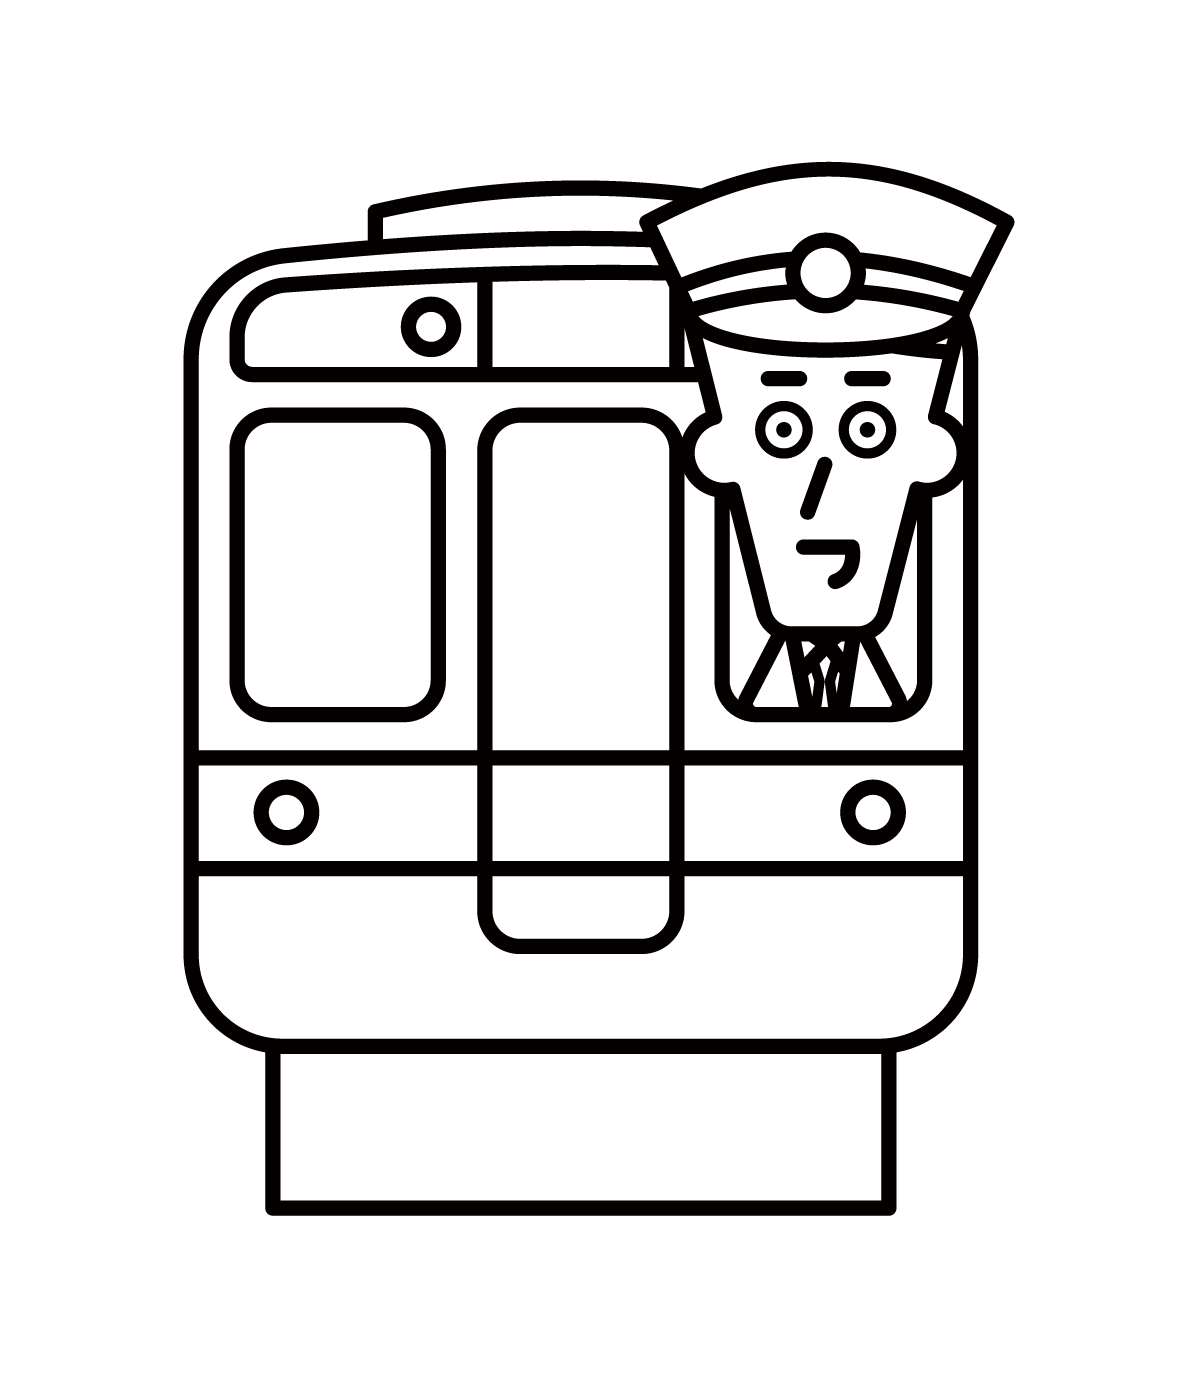 Illustration of train conductor and driver (male)